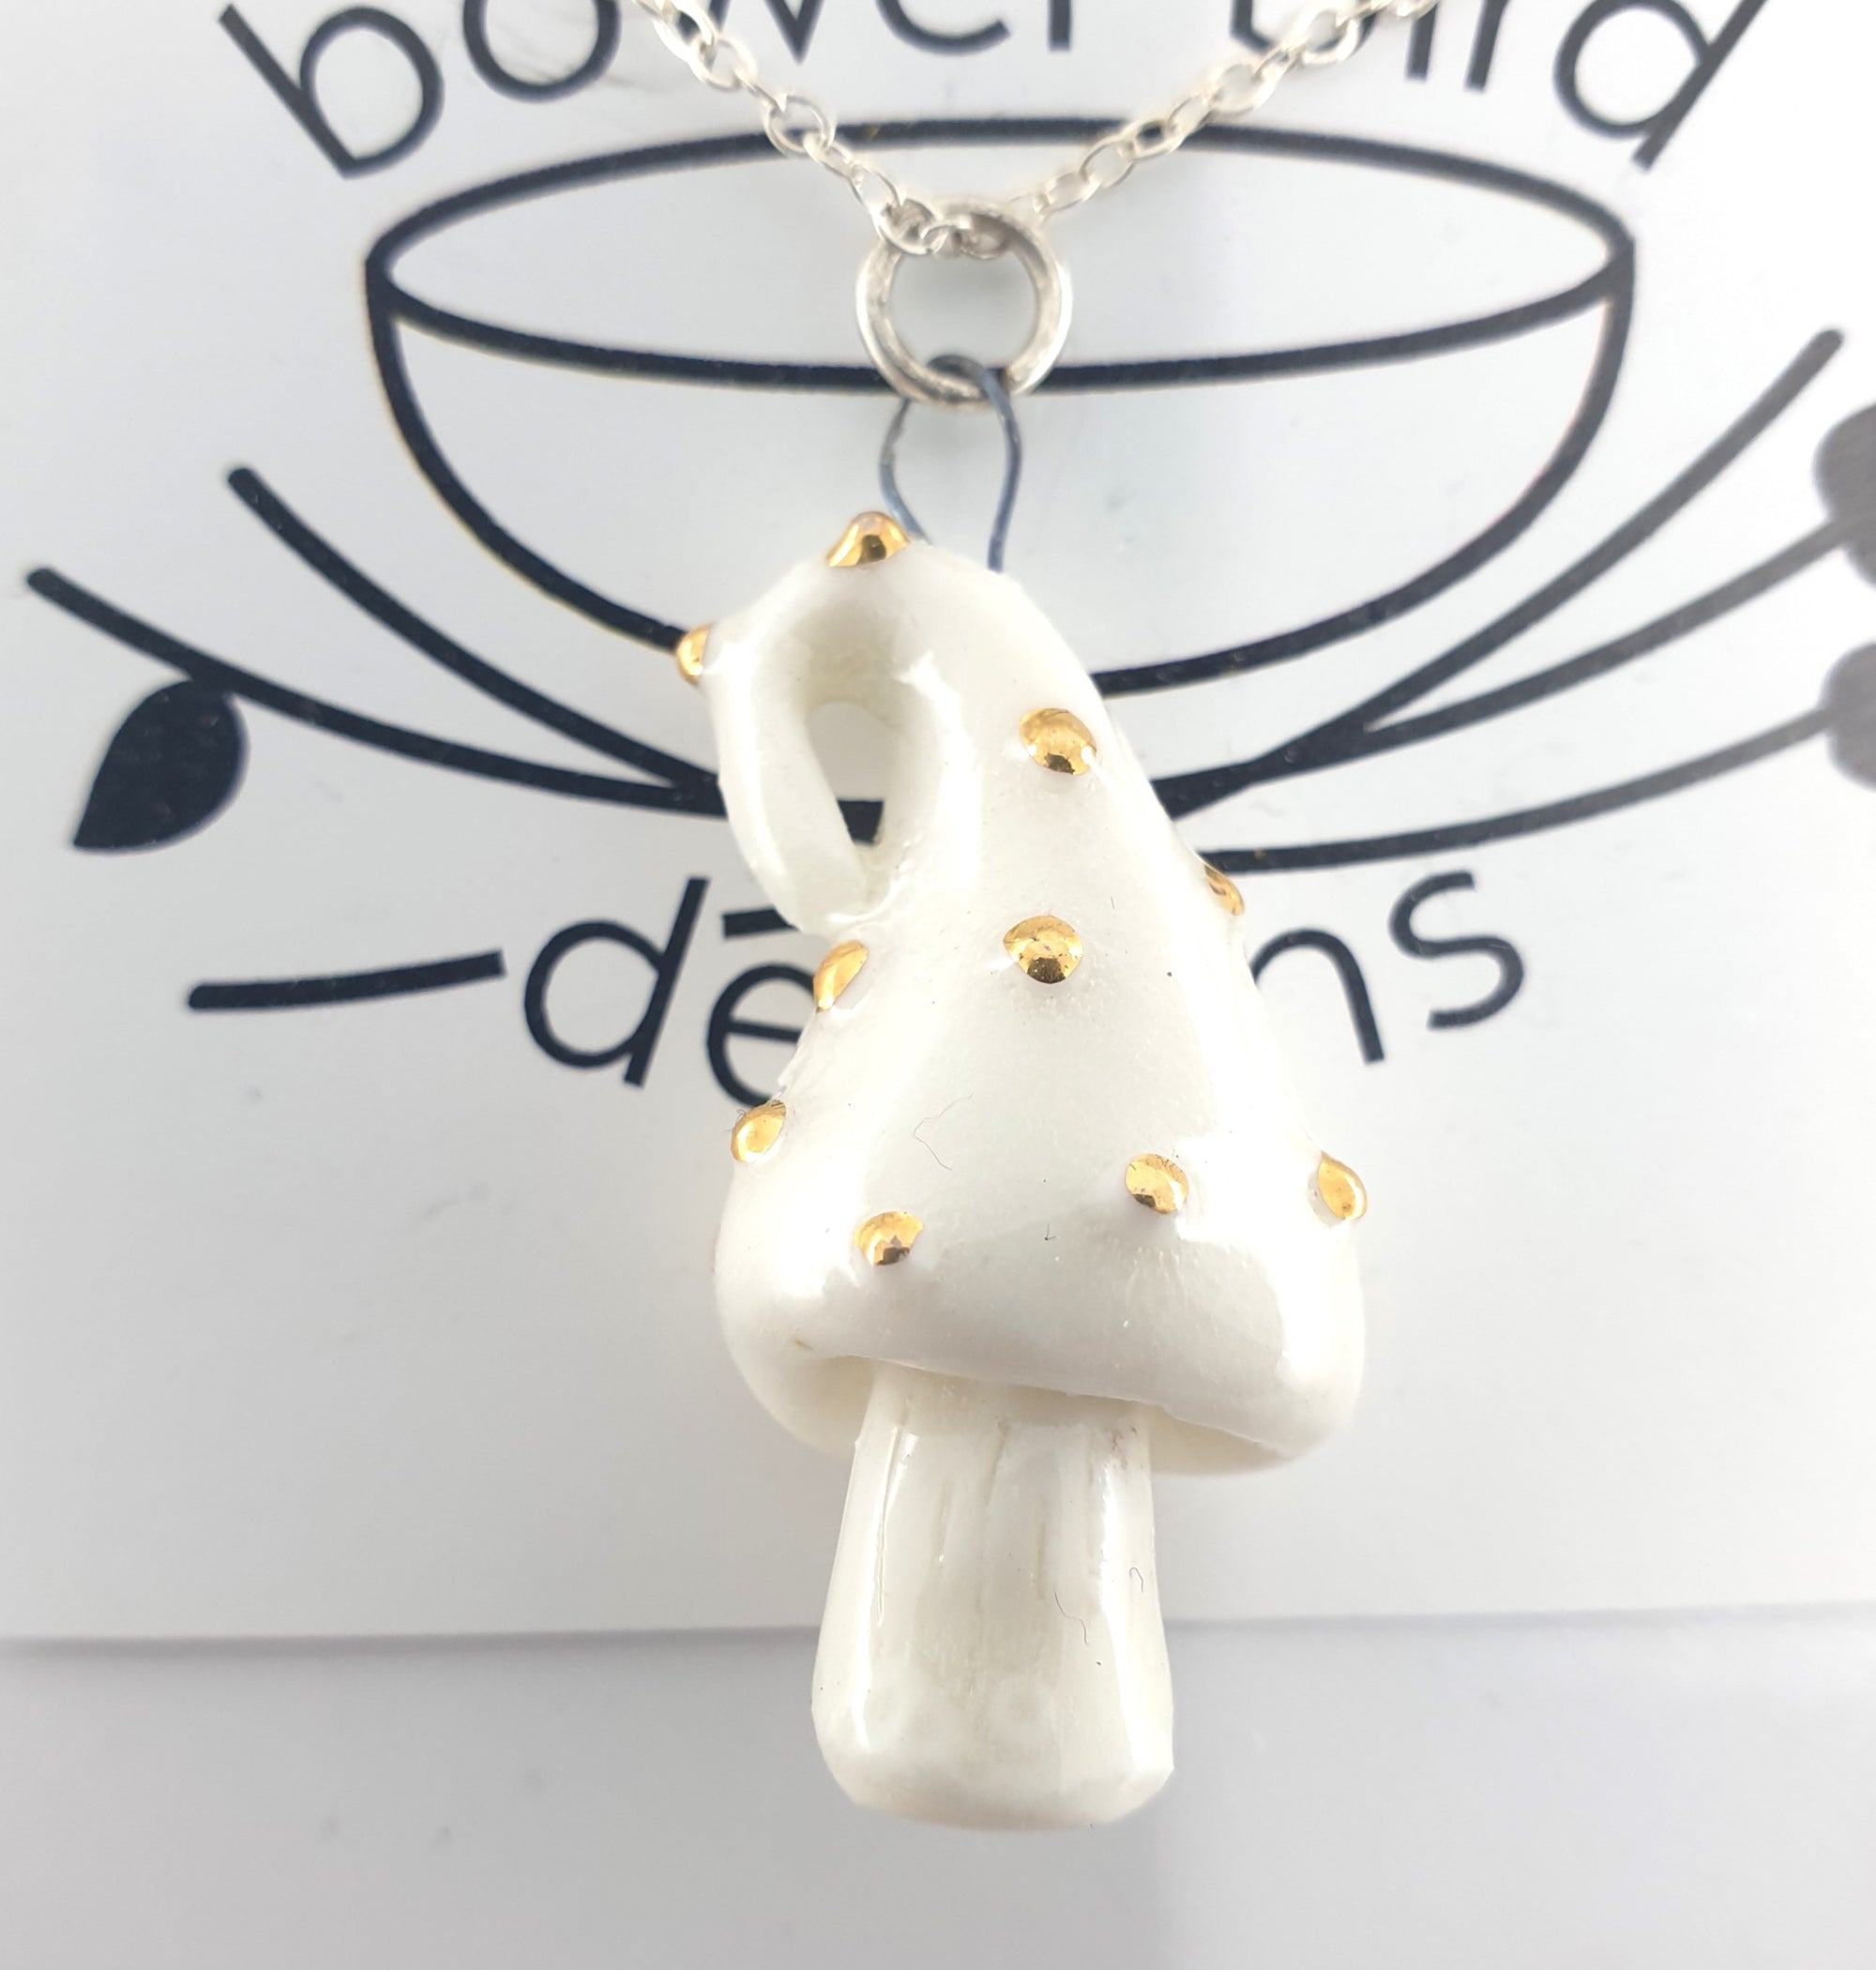 Mushroom pendant (twist top style) white and gold